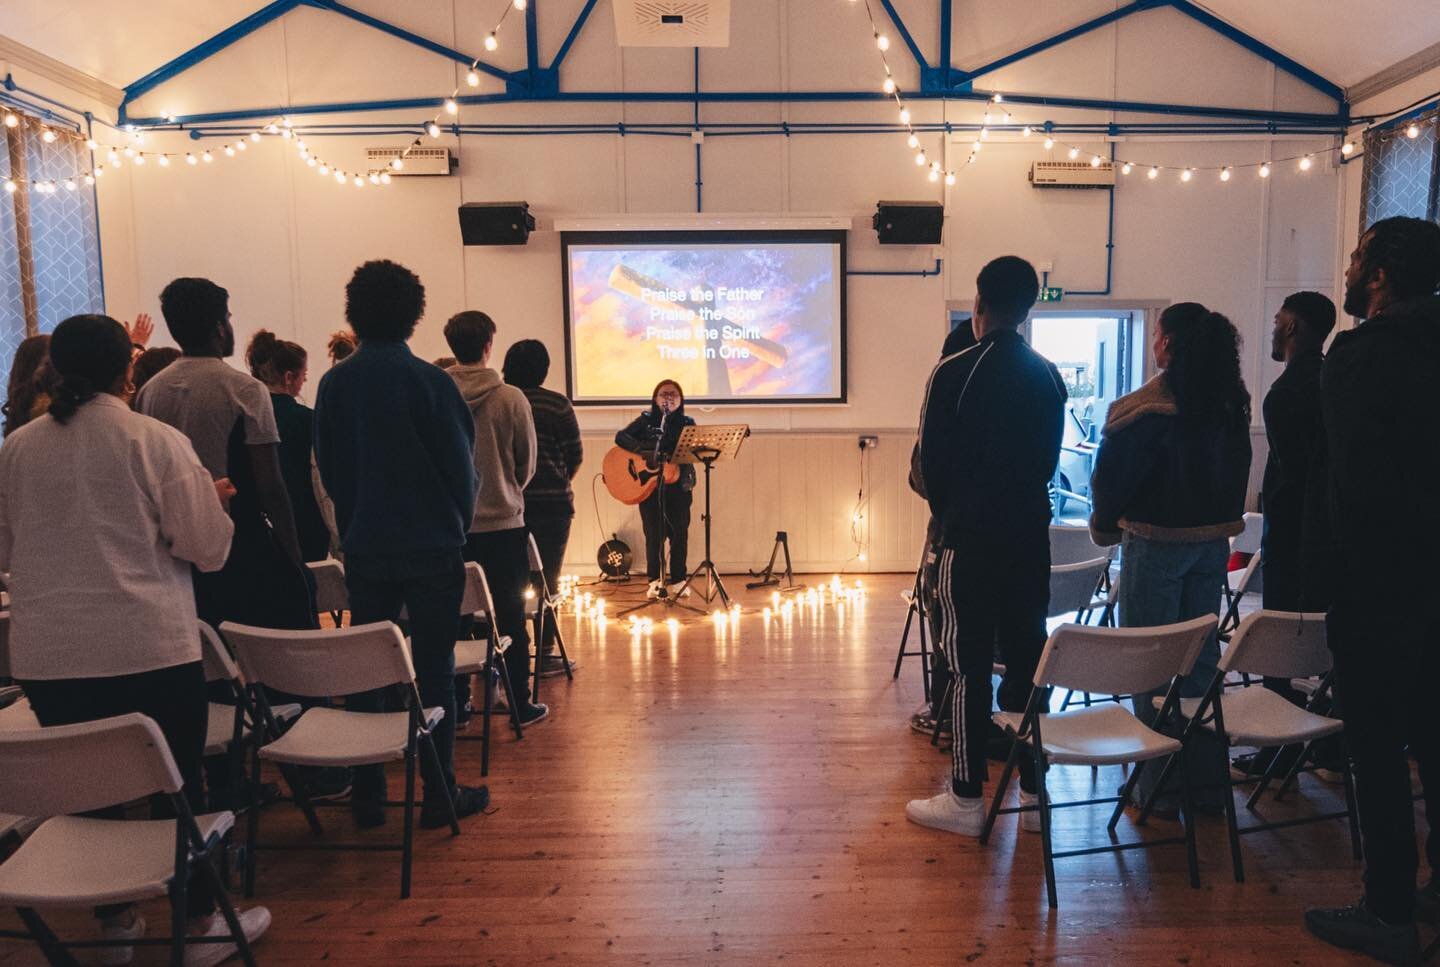 Reminder that Young Adults Service is coming up this coming Sunday at 7pm 🥳

For 20 and 30 somethings from anywhere!